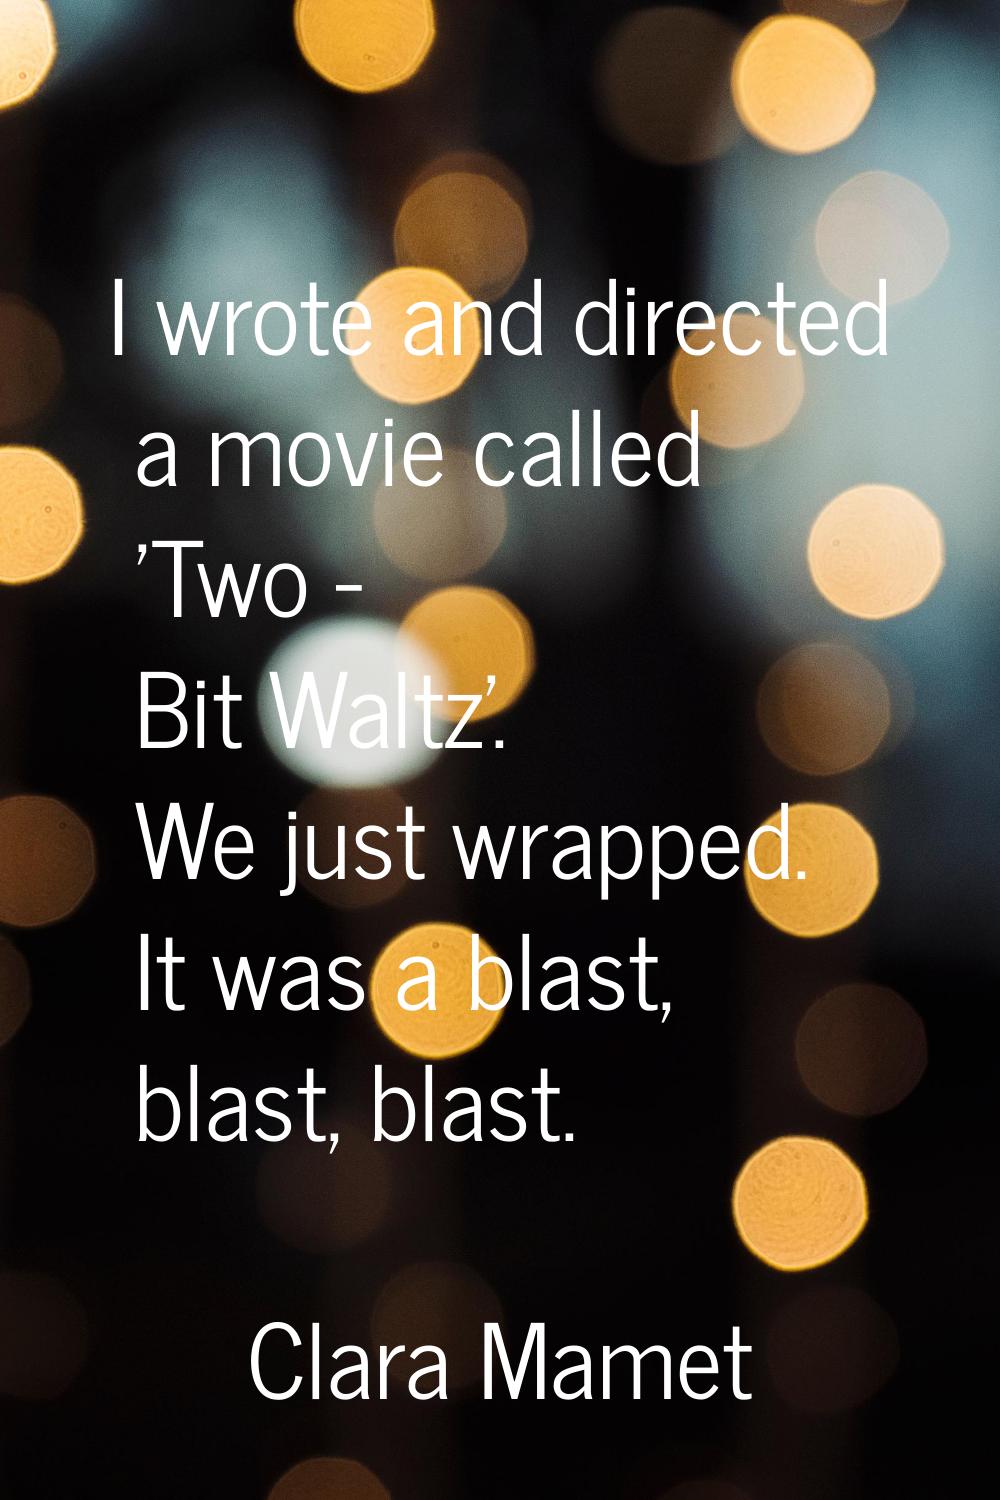 I wrote and directed a movie called 'Two - Bit Waltz'. We just wrapped. It was a blast, blast, blas